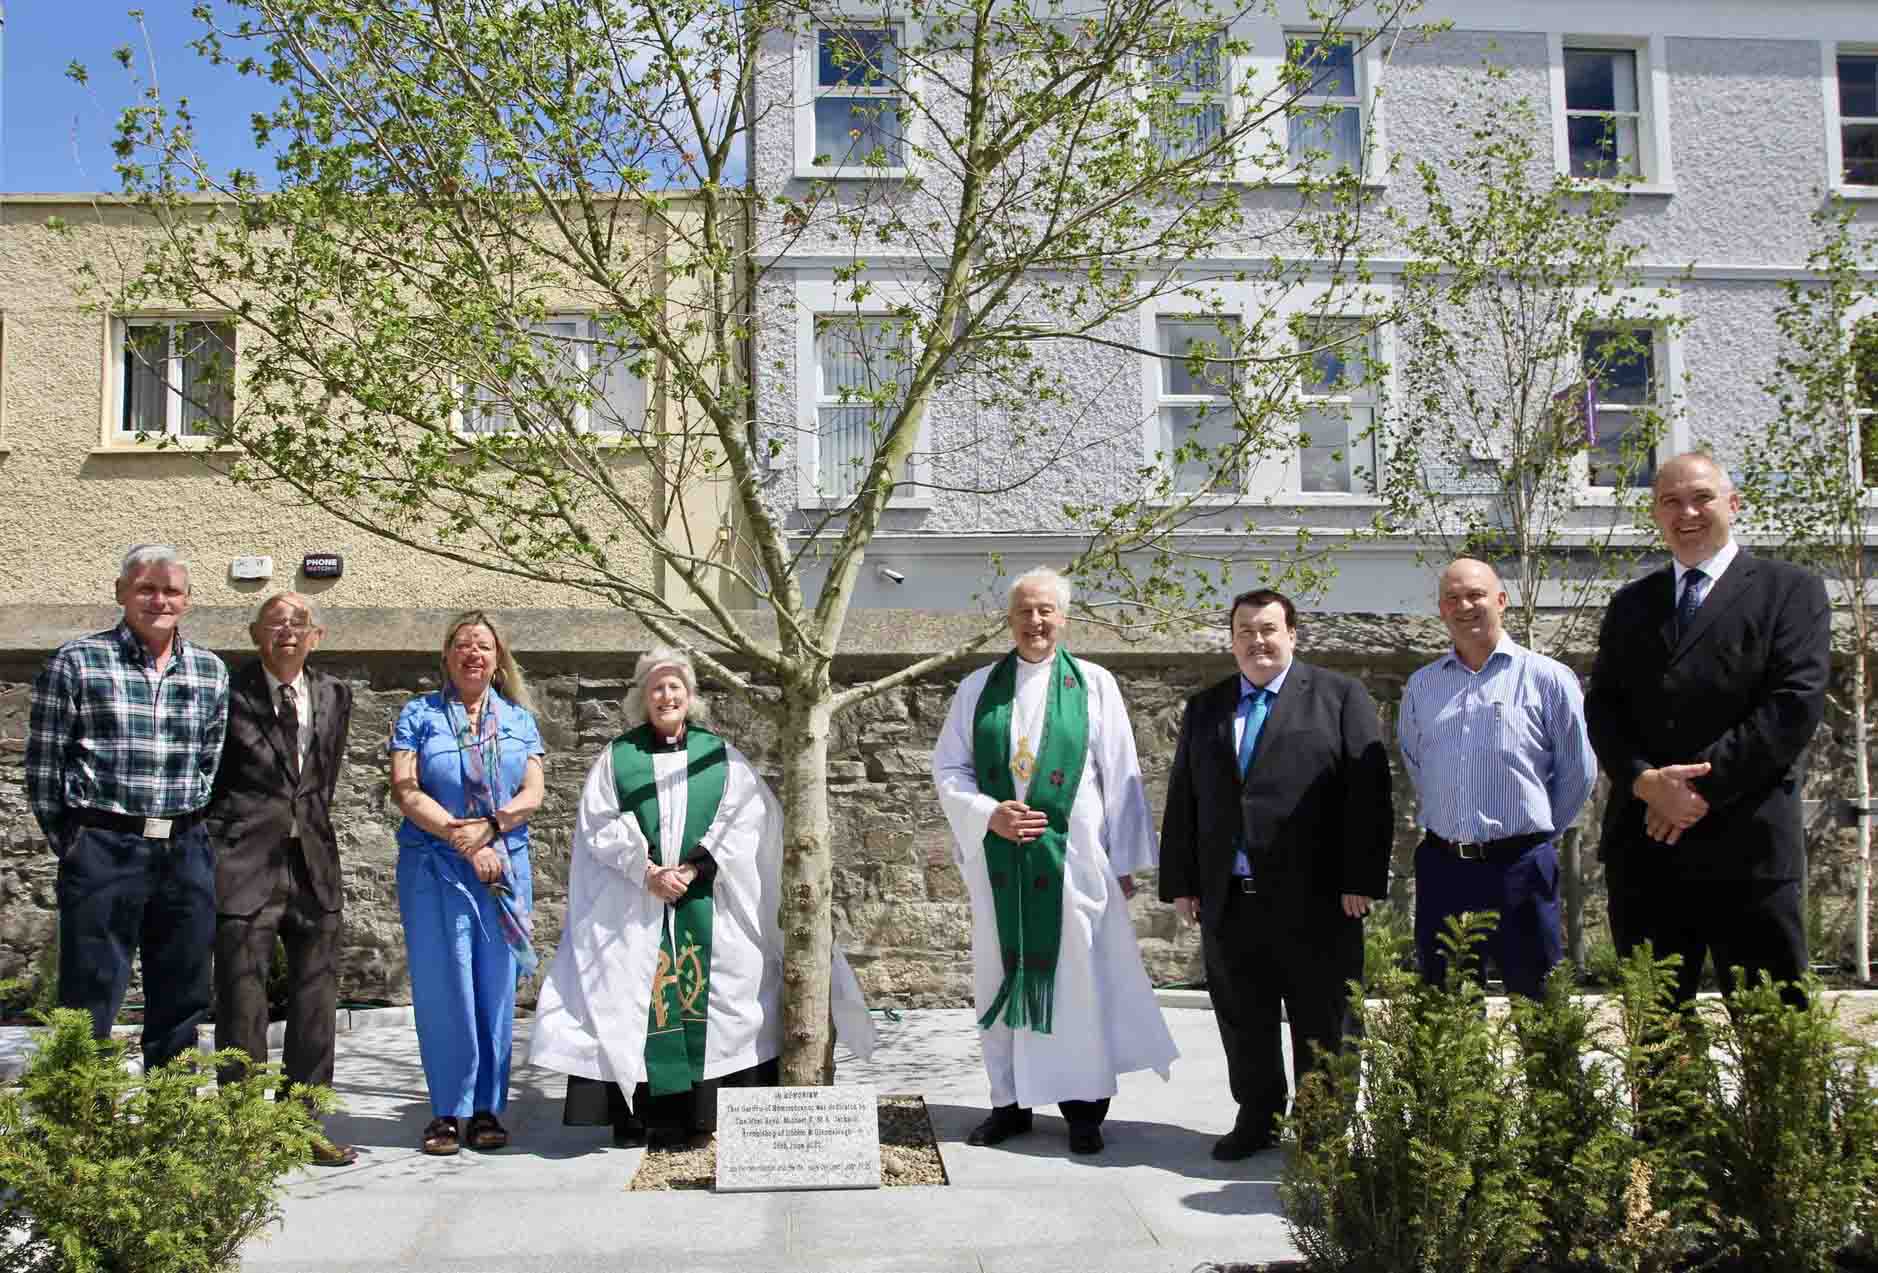 Members of the Rathfarnham parish Garden of Remembrance Subcommittee with Archbishop Michael Jackson, Canon Adrienne Galligan and Minister Colm Brophy.